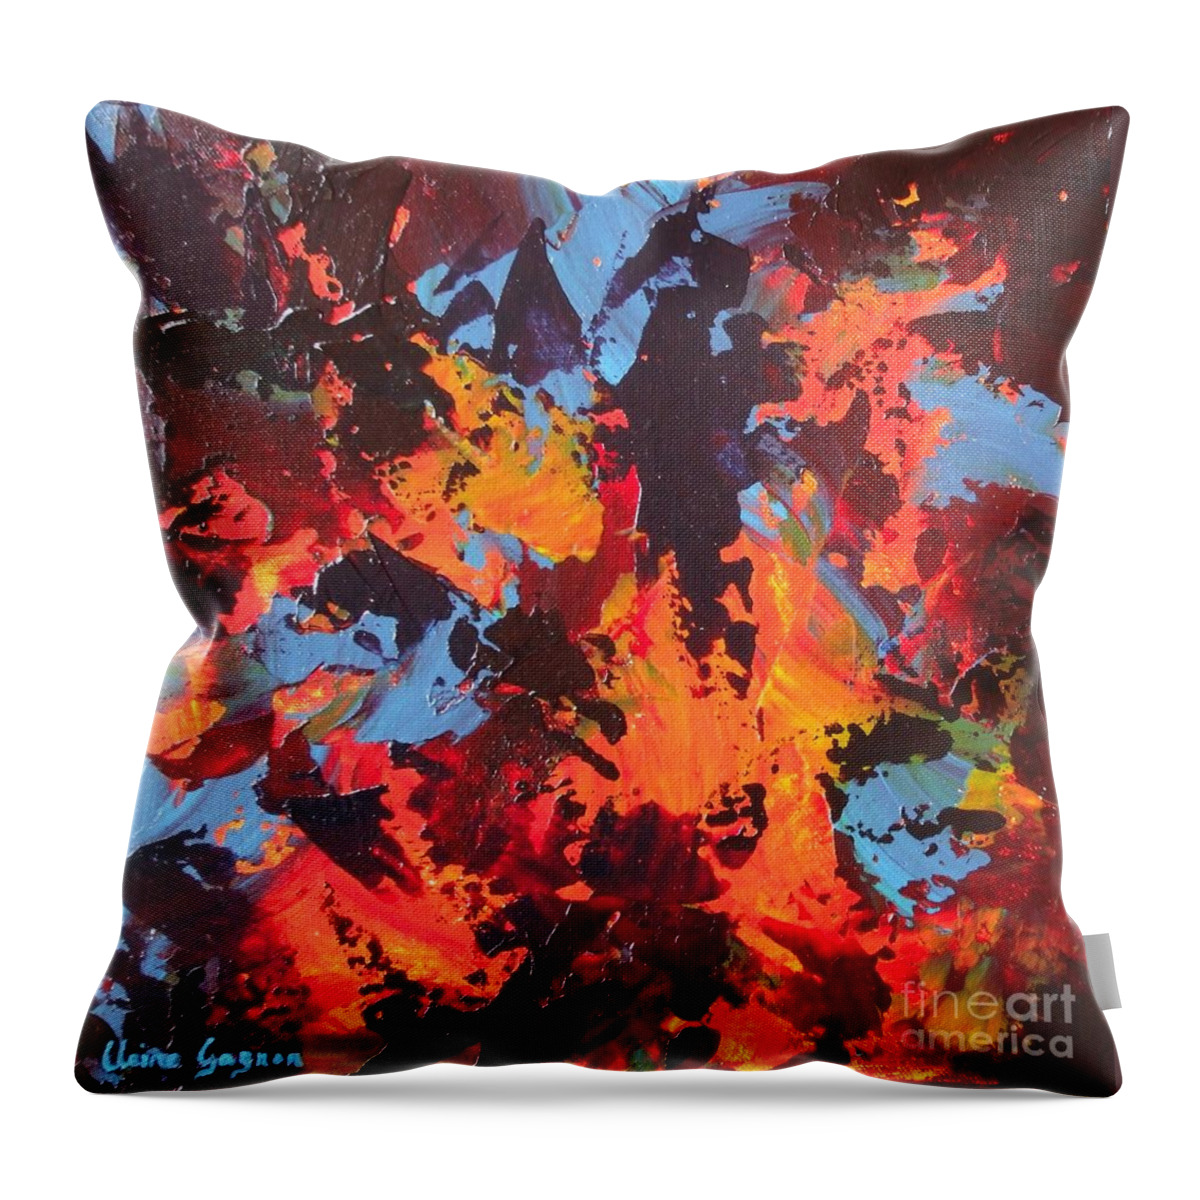 Abstract Throw Pillow featuring the painting Elephant by Claire Gagnon